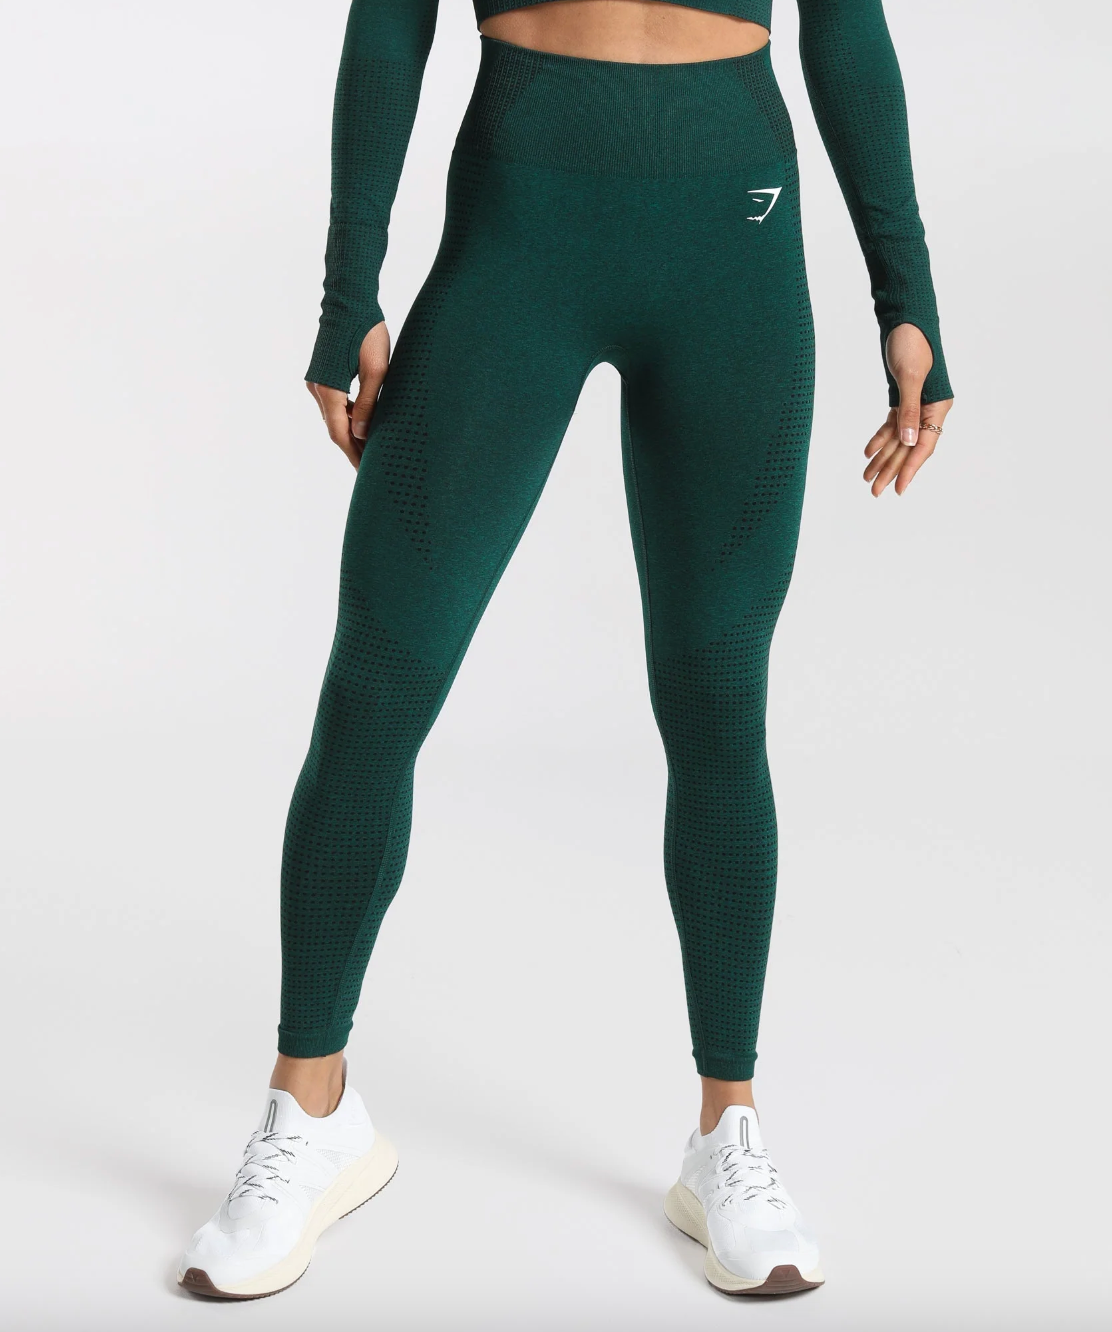 GYMSHARK NEW RELEASES  adapt animal + adapt marl seamless review